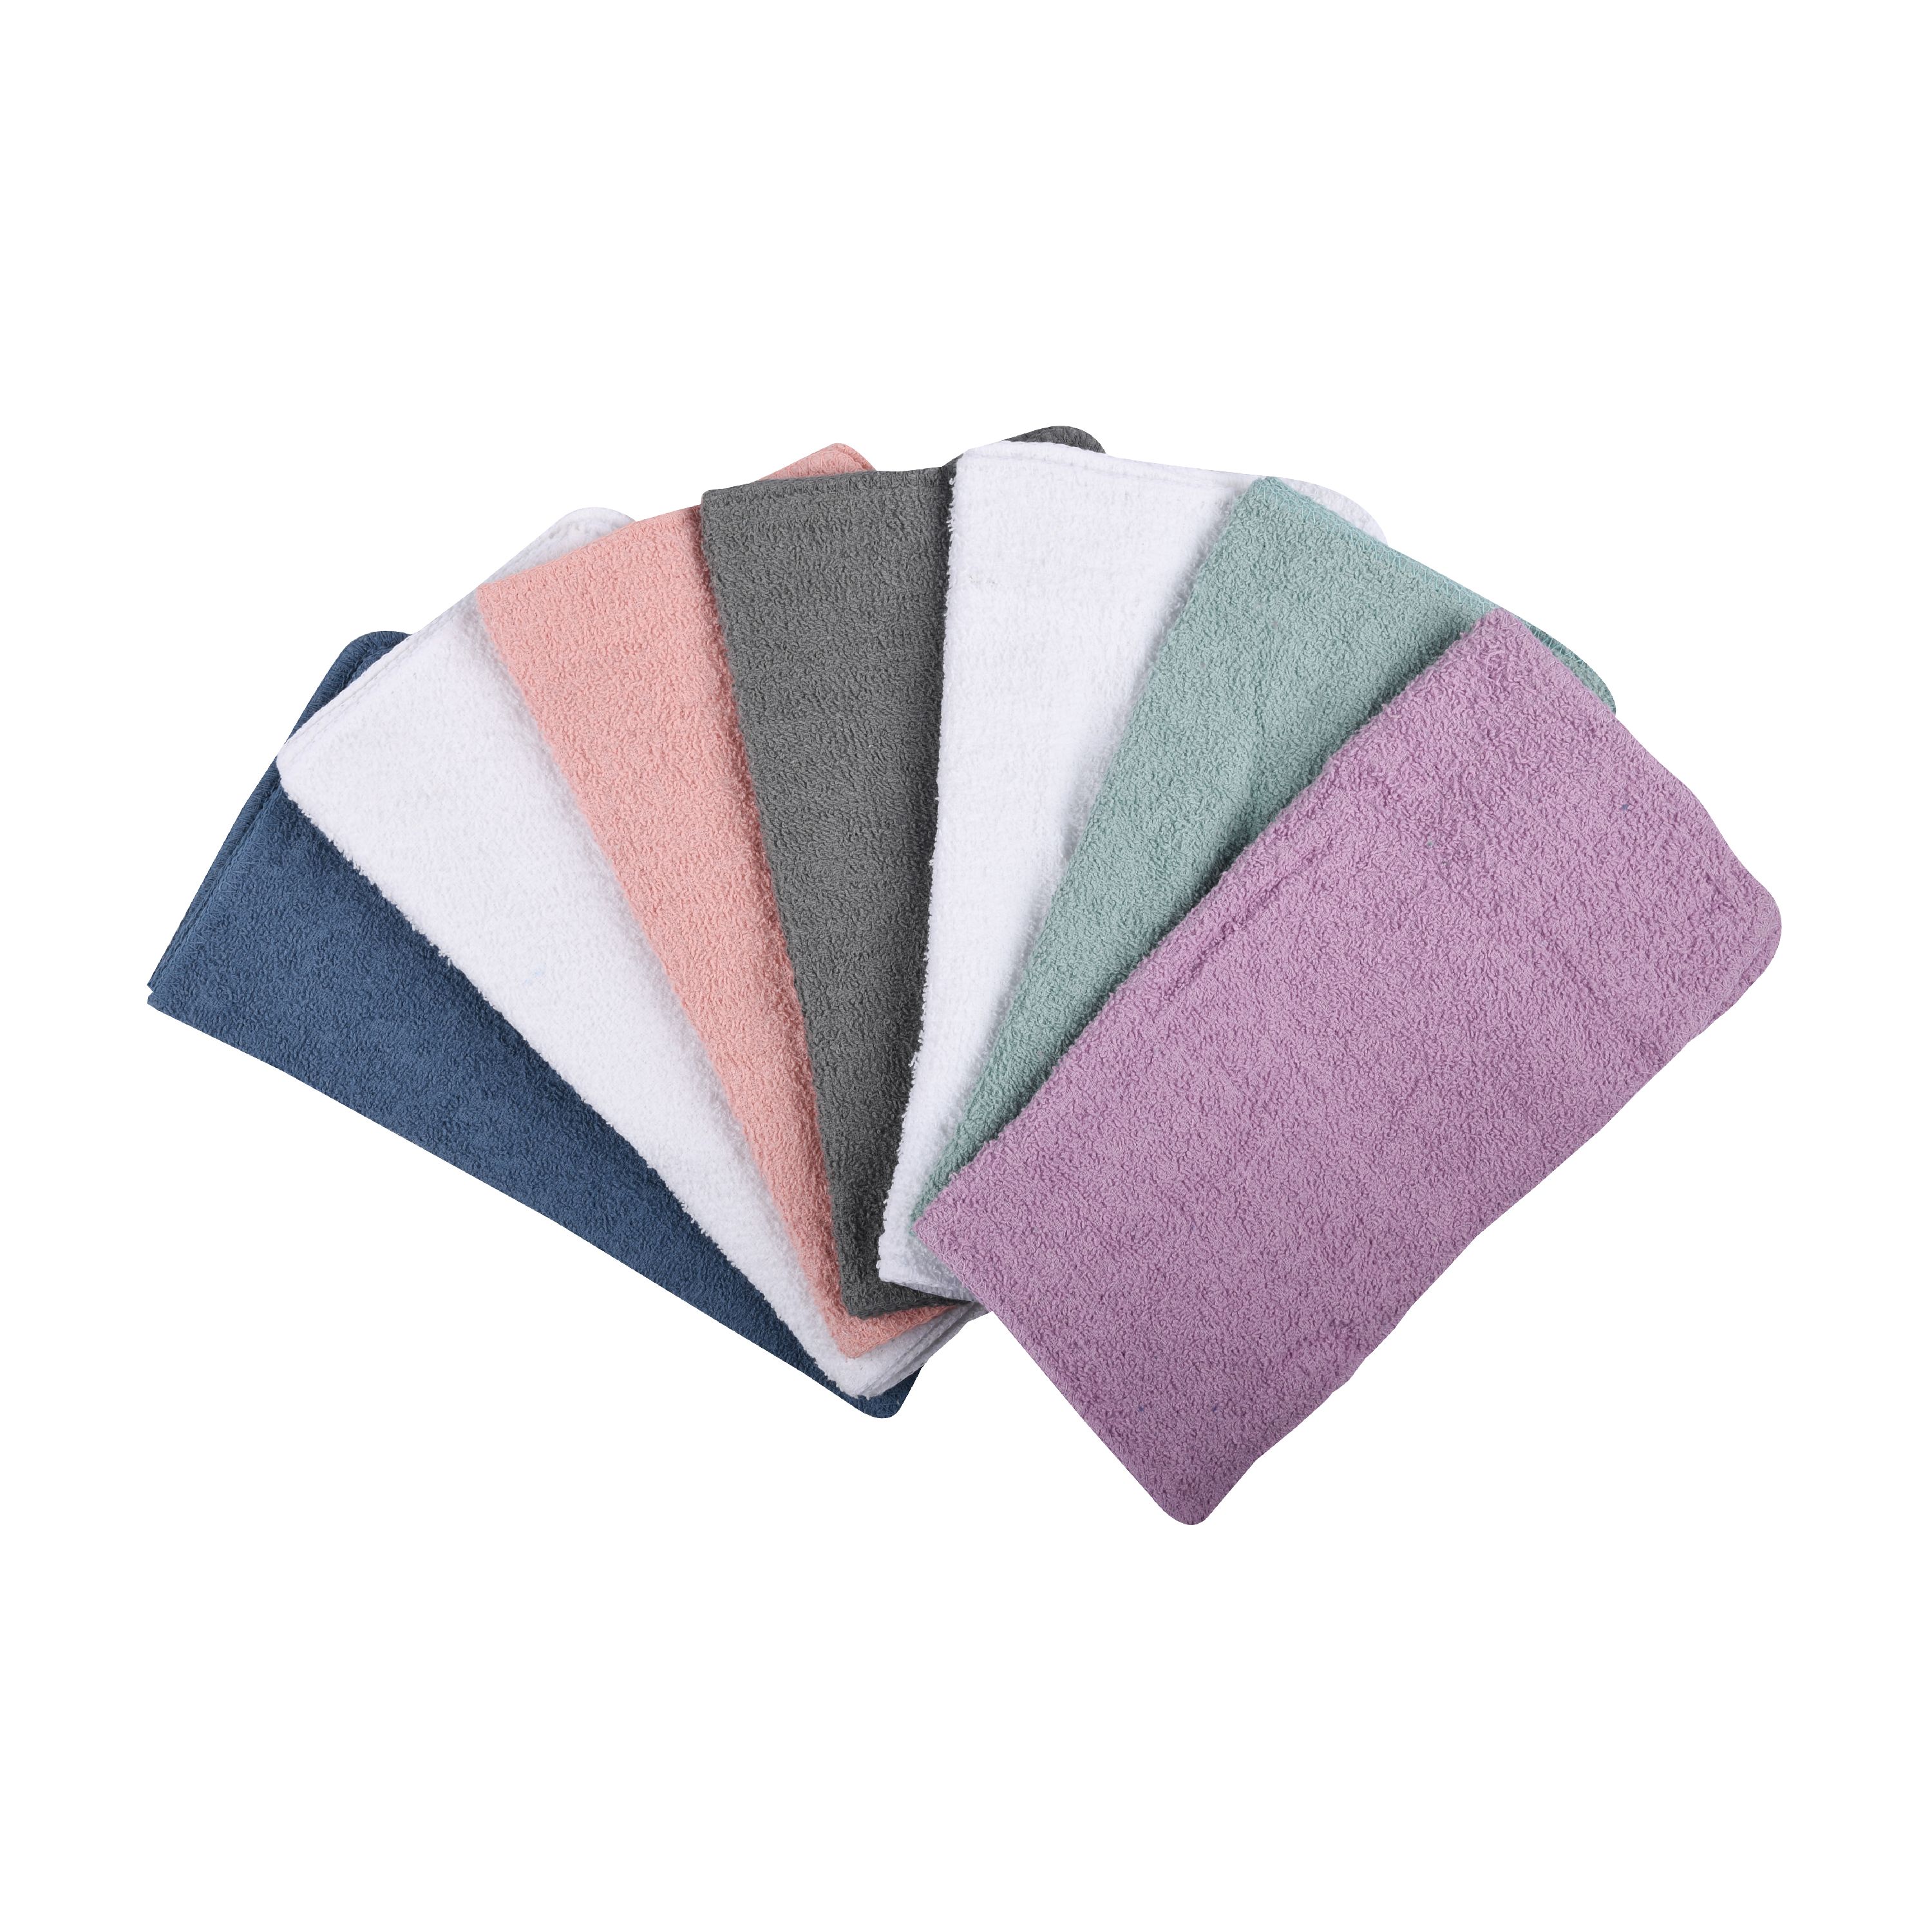 Mainstays Cotton Washcloth Collection, 18-Pack, Pastel - image 3 of 4